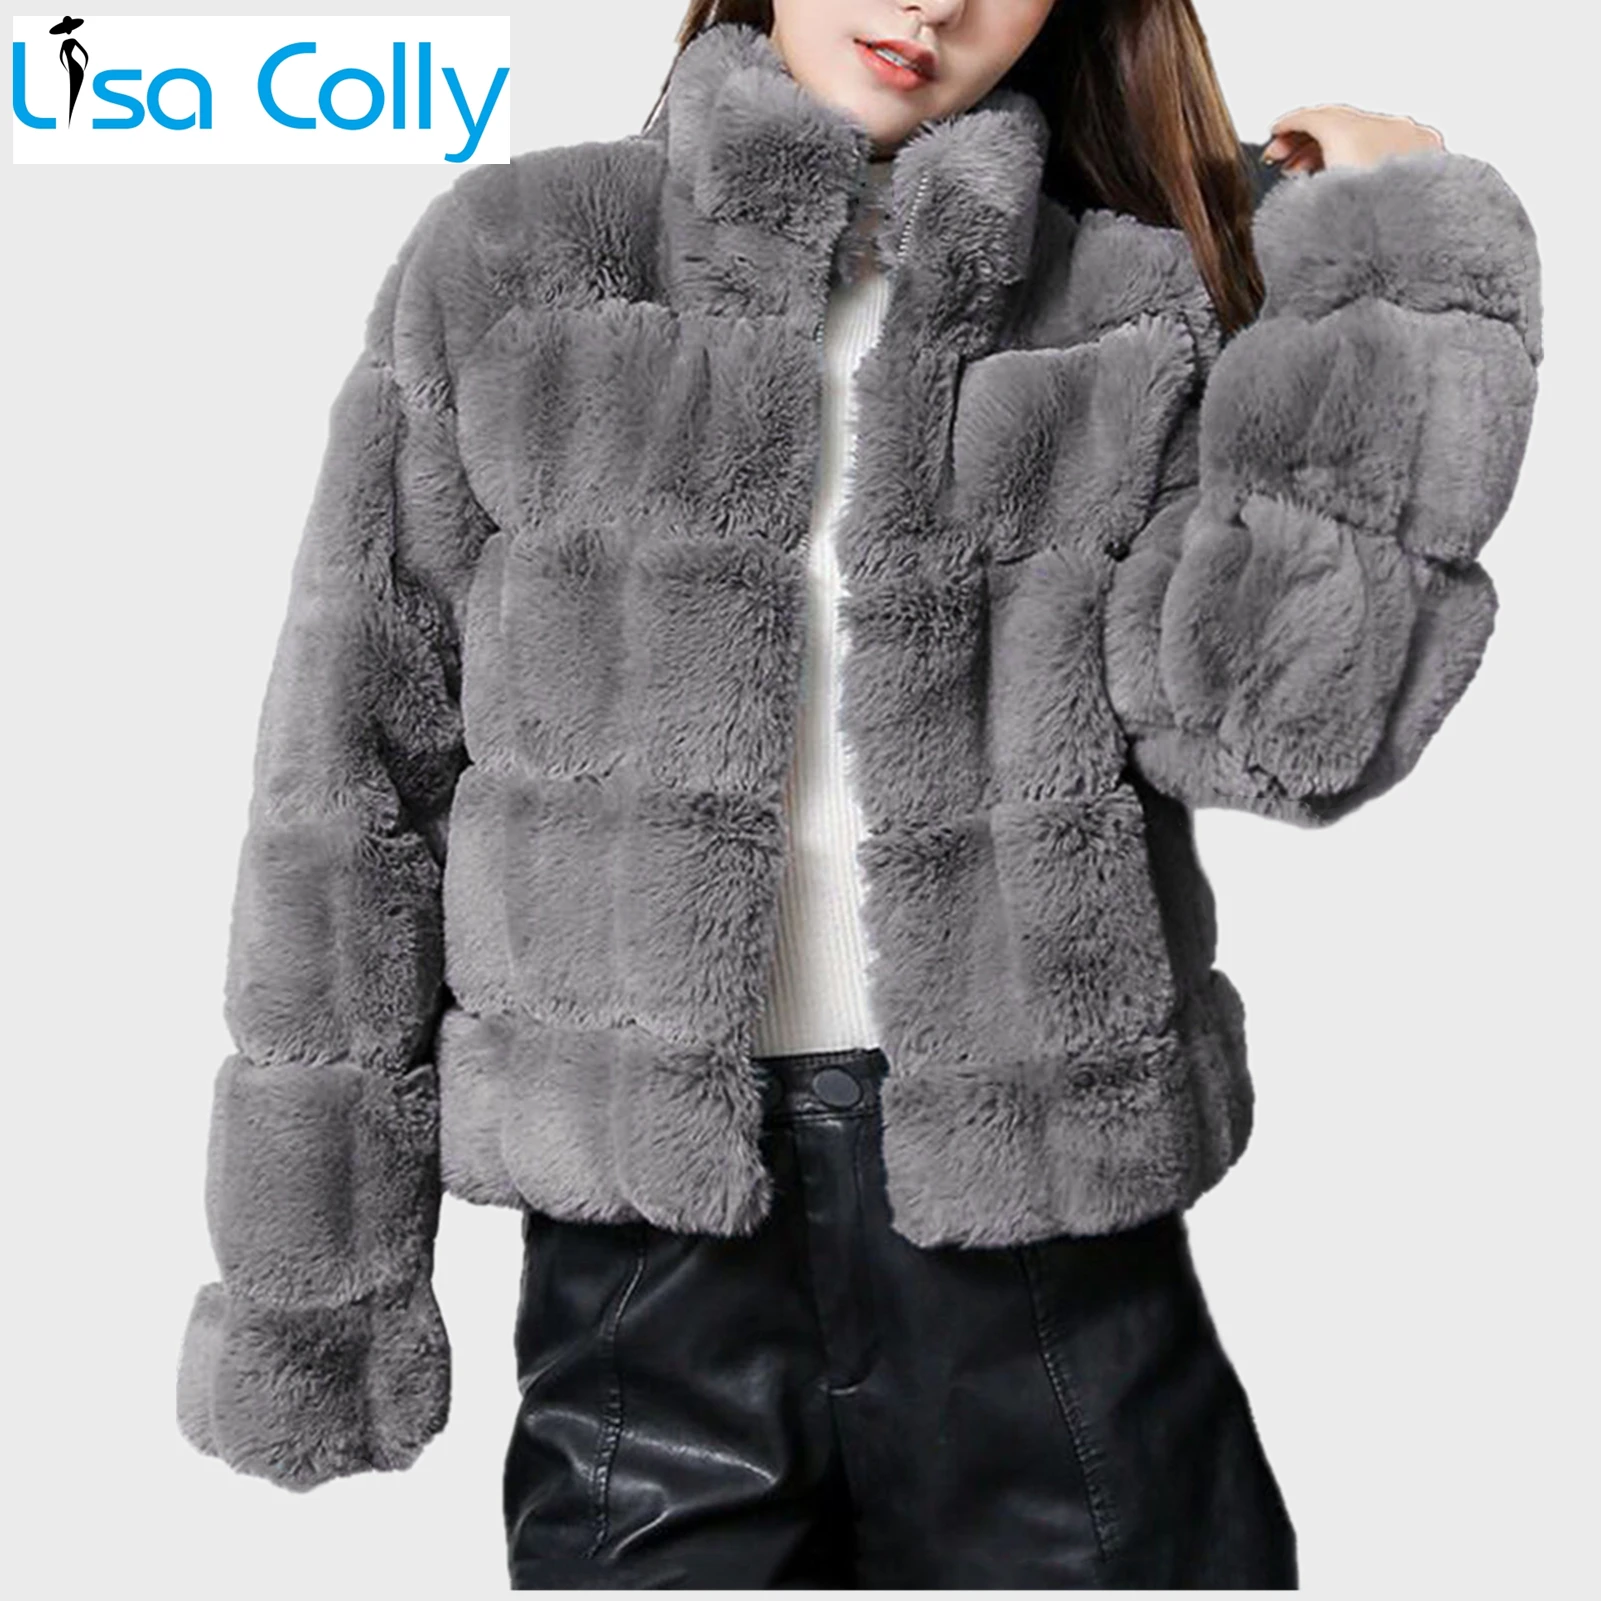 High Quality Women Winter Long Seleve Stand Collar Furry Faux Fur Coats Elegant Thick Warm Outerwear Fake Fur Jacket